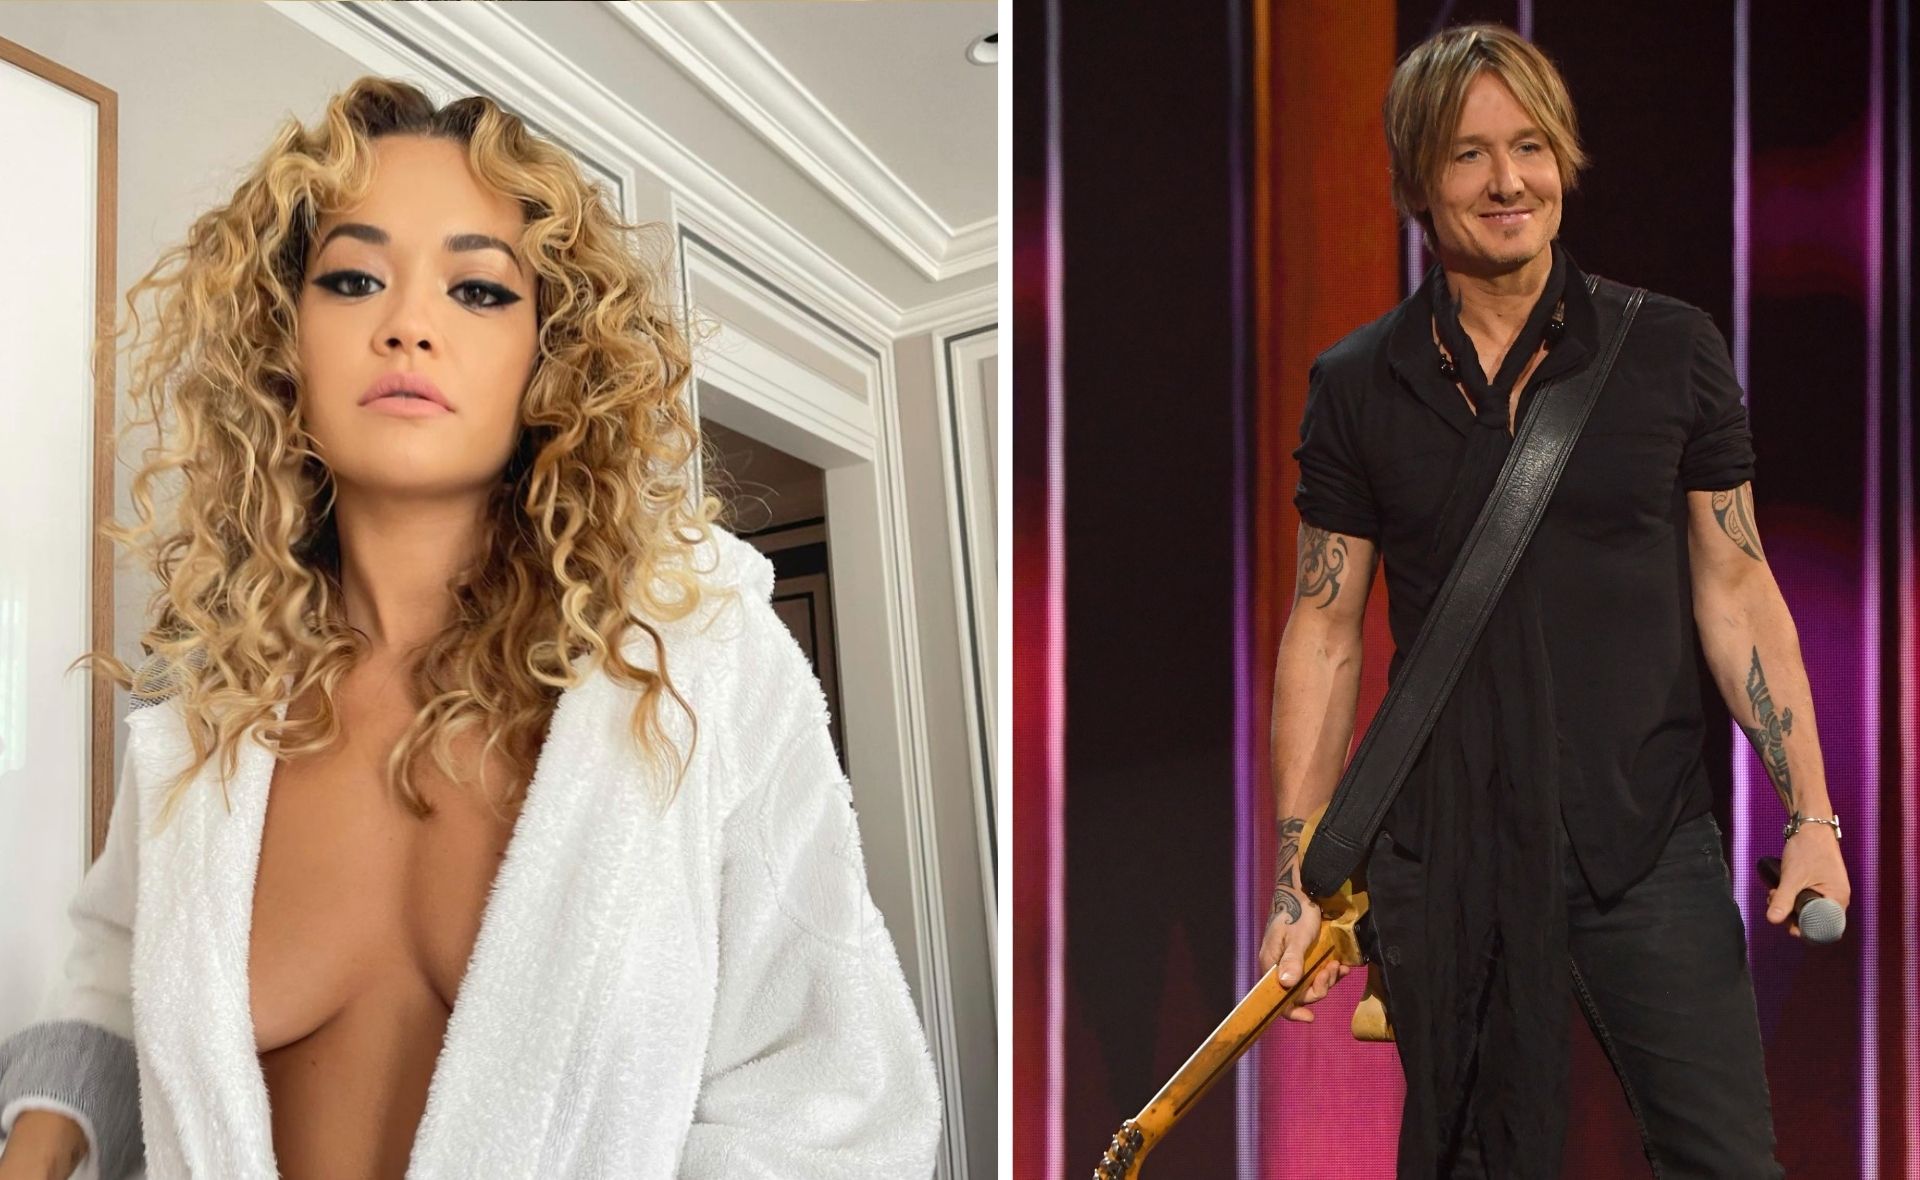 Rita vs Keith: The controversial moment that had Rita Ora reeling after Keith Urban’s sneaky move left her stranded